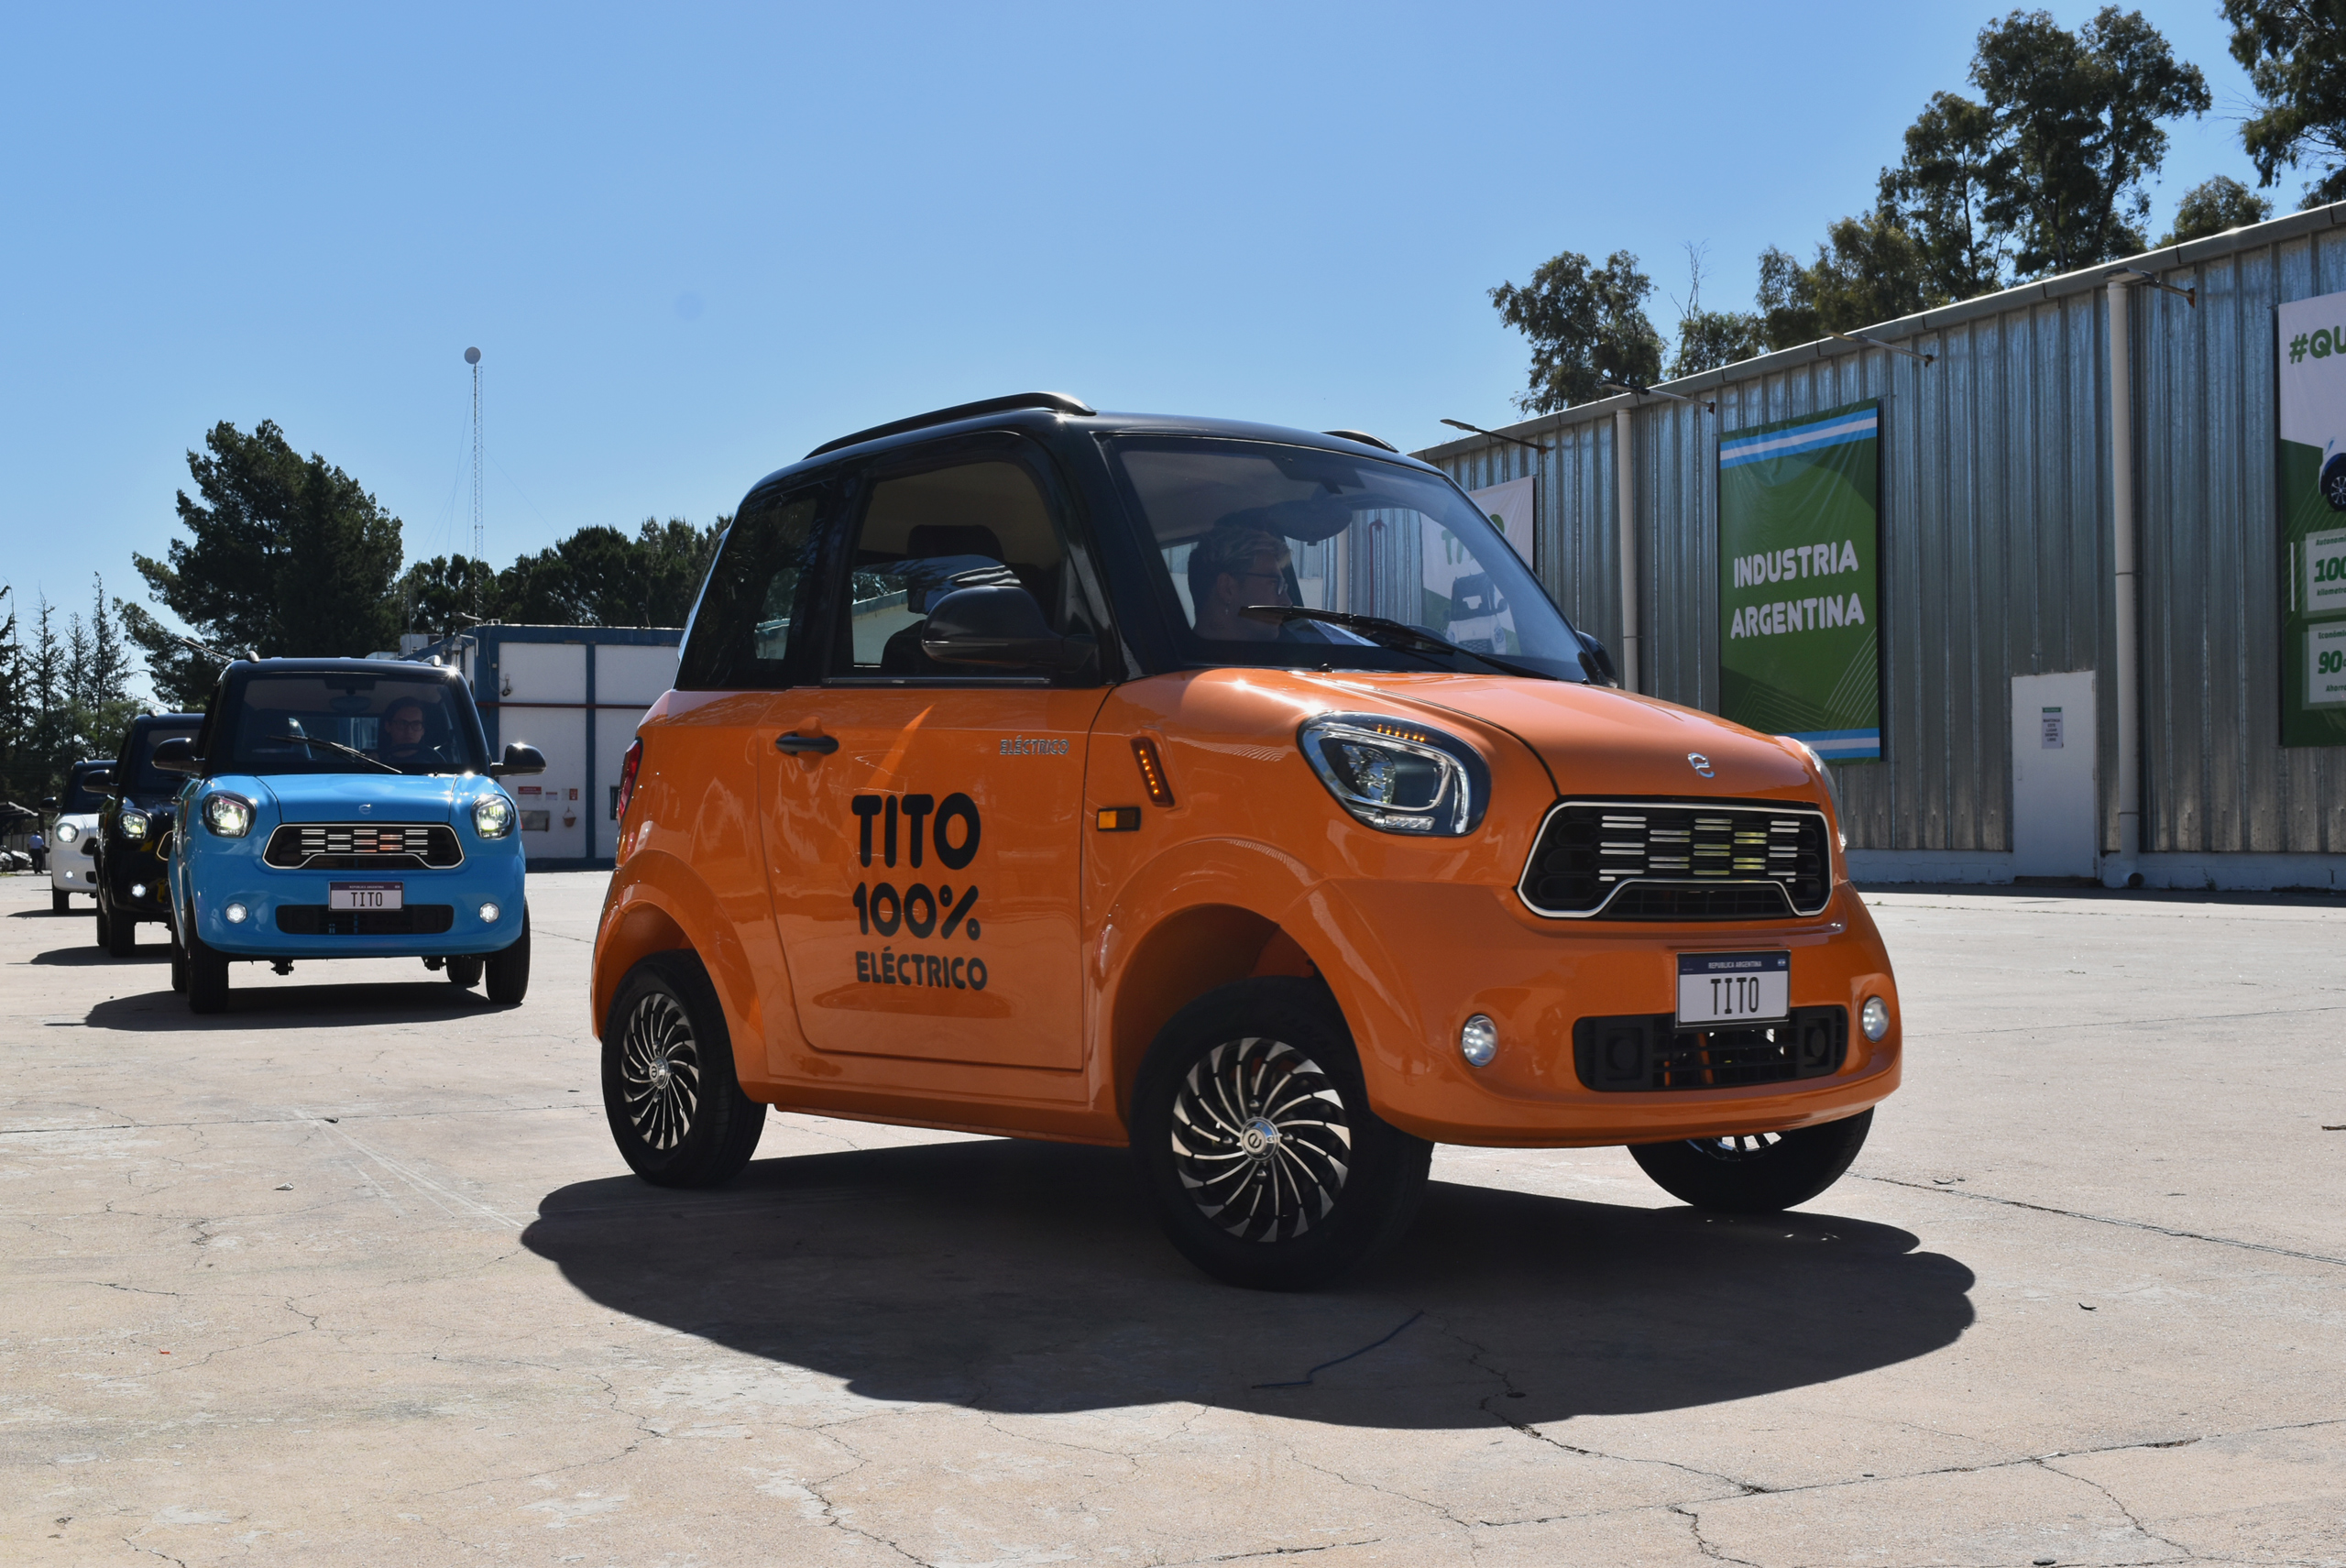 <p>A demonstration of the compact Tito, the first Argentine-made electric car. Economic challenges, and investment and cultural barriers are said to be slowing the growth of electric mobility in the country. (Image: CORADIR)</p>